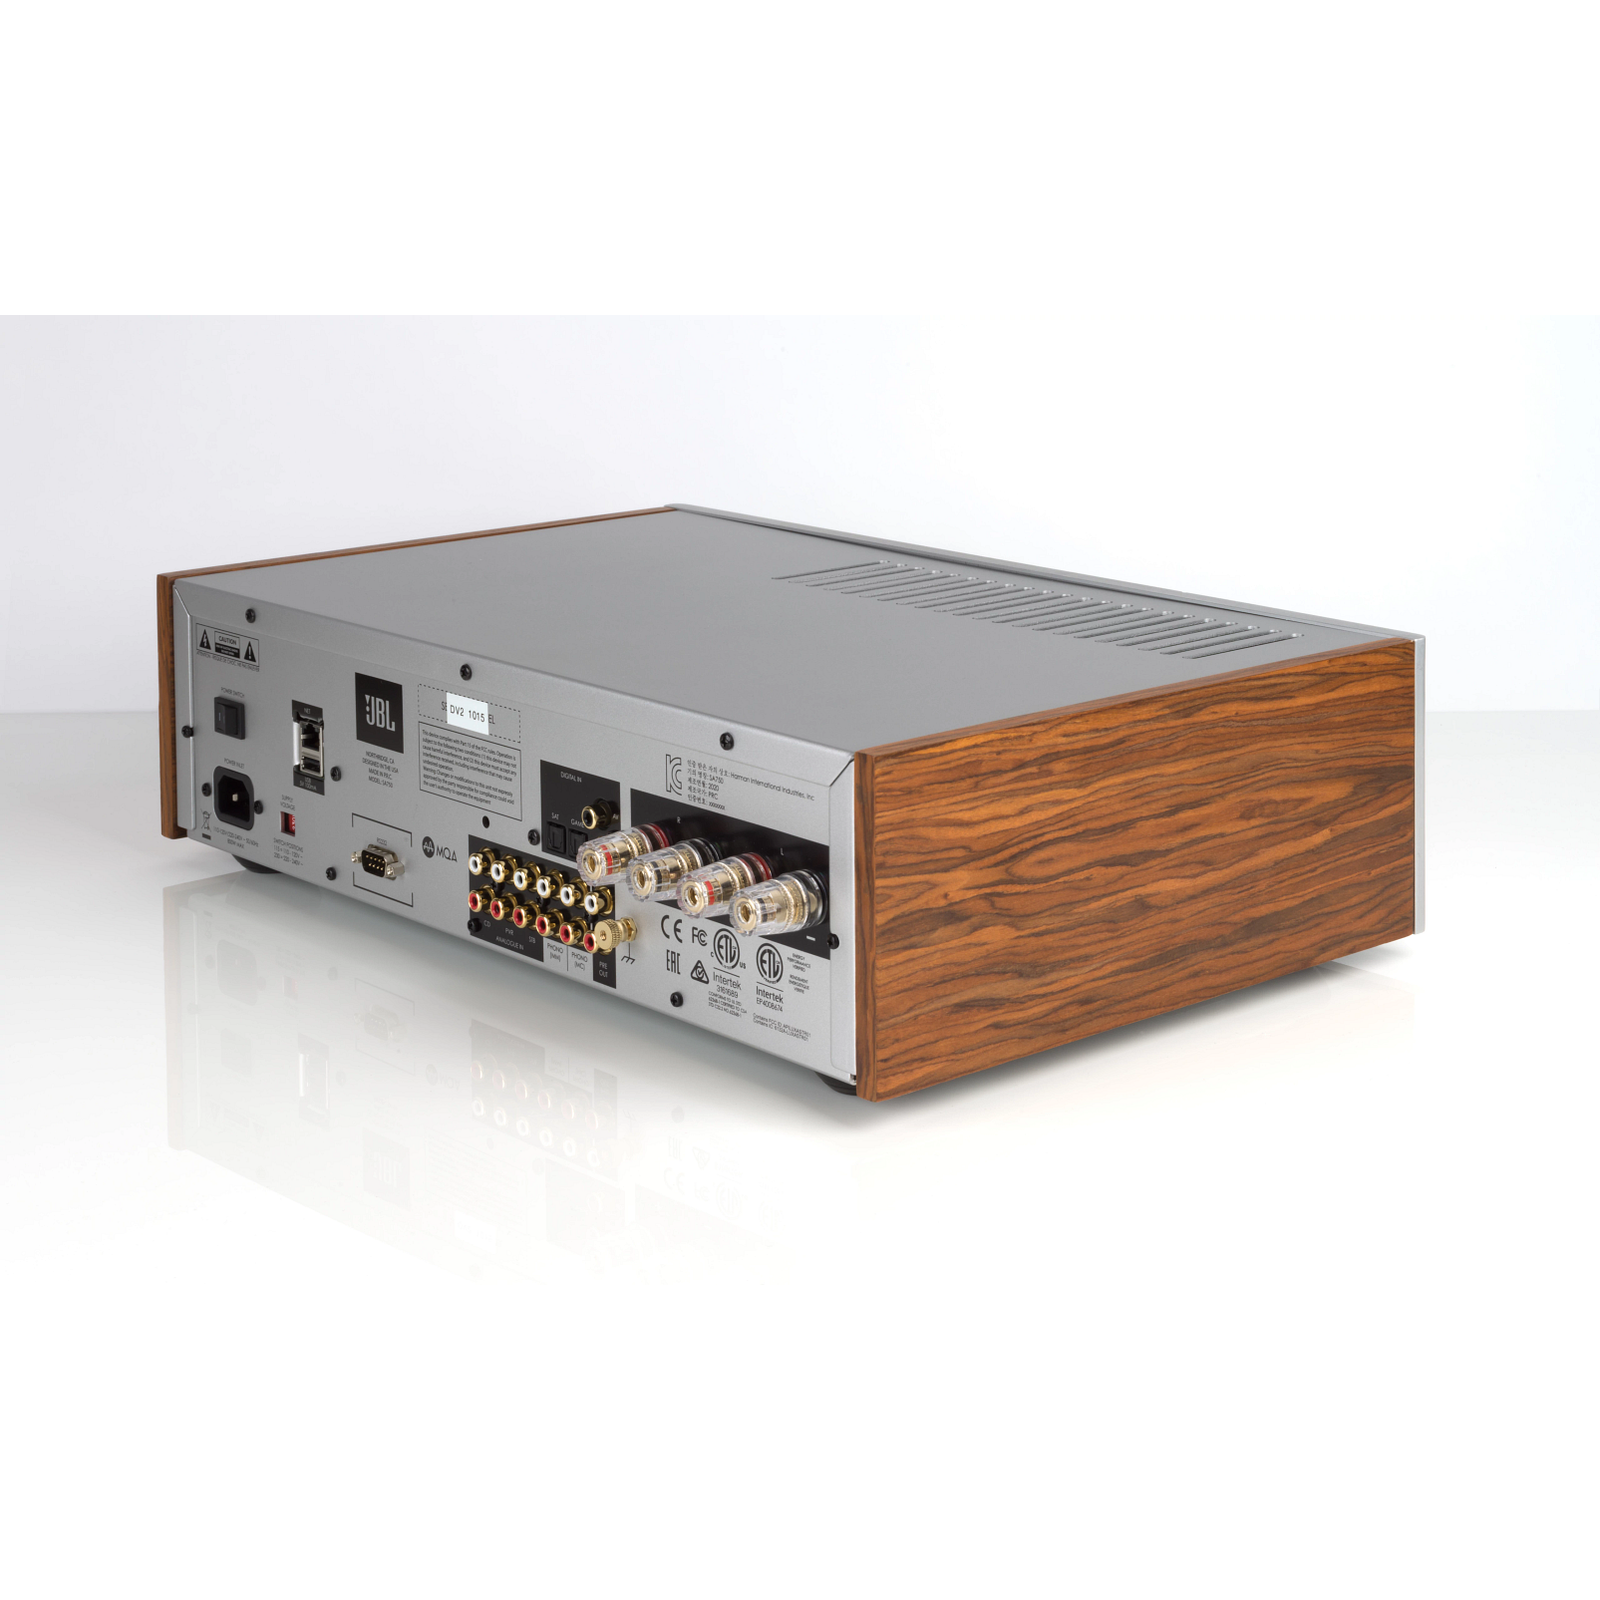 JBL SA750 Streaming Integrated Stereo Amplifier The JBL SA750 is inspired by the classic JBL SA600 amplifier from the 1960’s, with retro styling and walnut veneer side panels to match JBL loudspeakers on the outside, with state-of-the-art streaming audio, wireless connectivity, Dirac Live room correction and Class G amplifier technology on the inside.